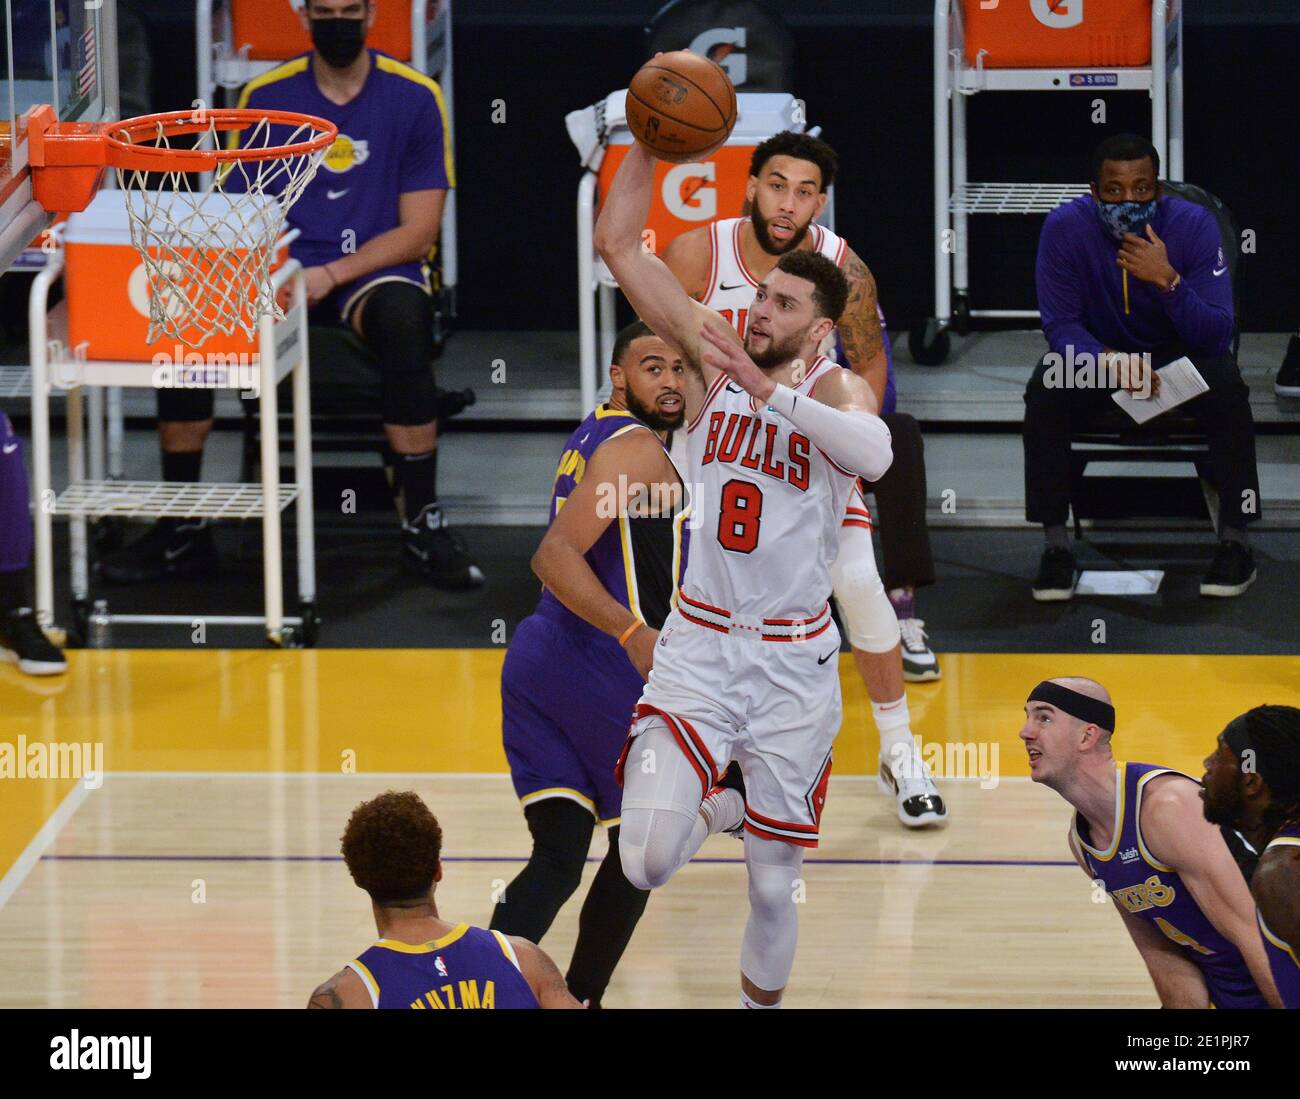 Los Angeles, United States. 08th Jan, 2021. Chicago Bulls' Zach Lavine splits the Los Angeles Lakers' defenders in the paint to score during the first quarter at Staples Center in Los Angeles on Friday, January 8, 2021. The Lakers defeated the Bulls 117-115. Photo by Jim Ruymen/UPI Credit: UPI/Alamy Live News Stock Photo